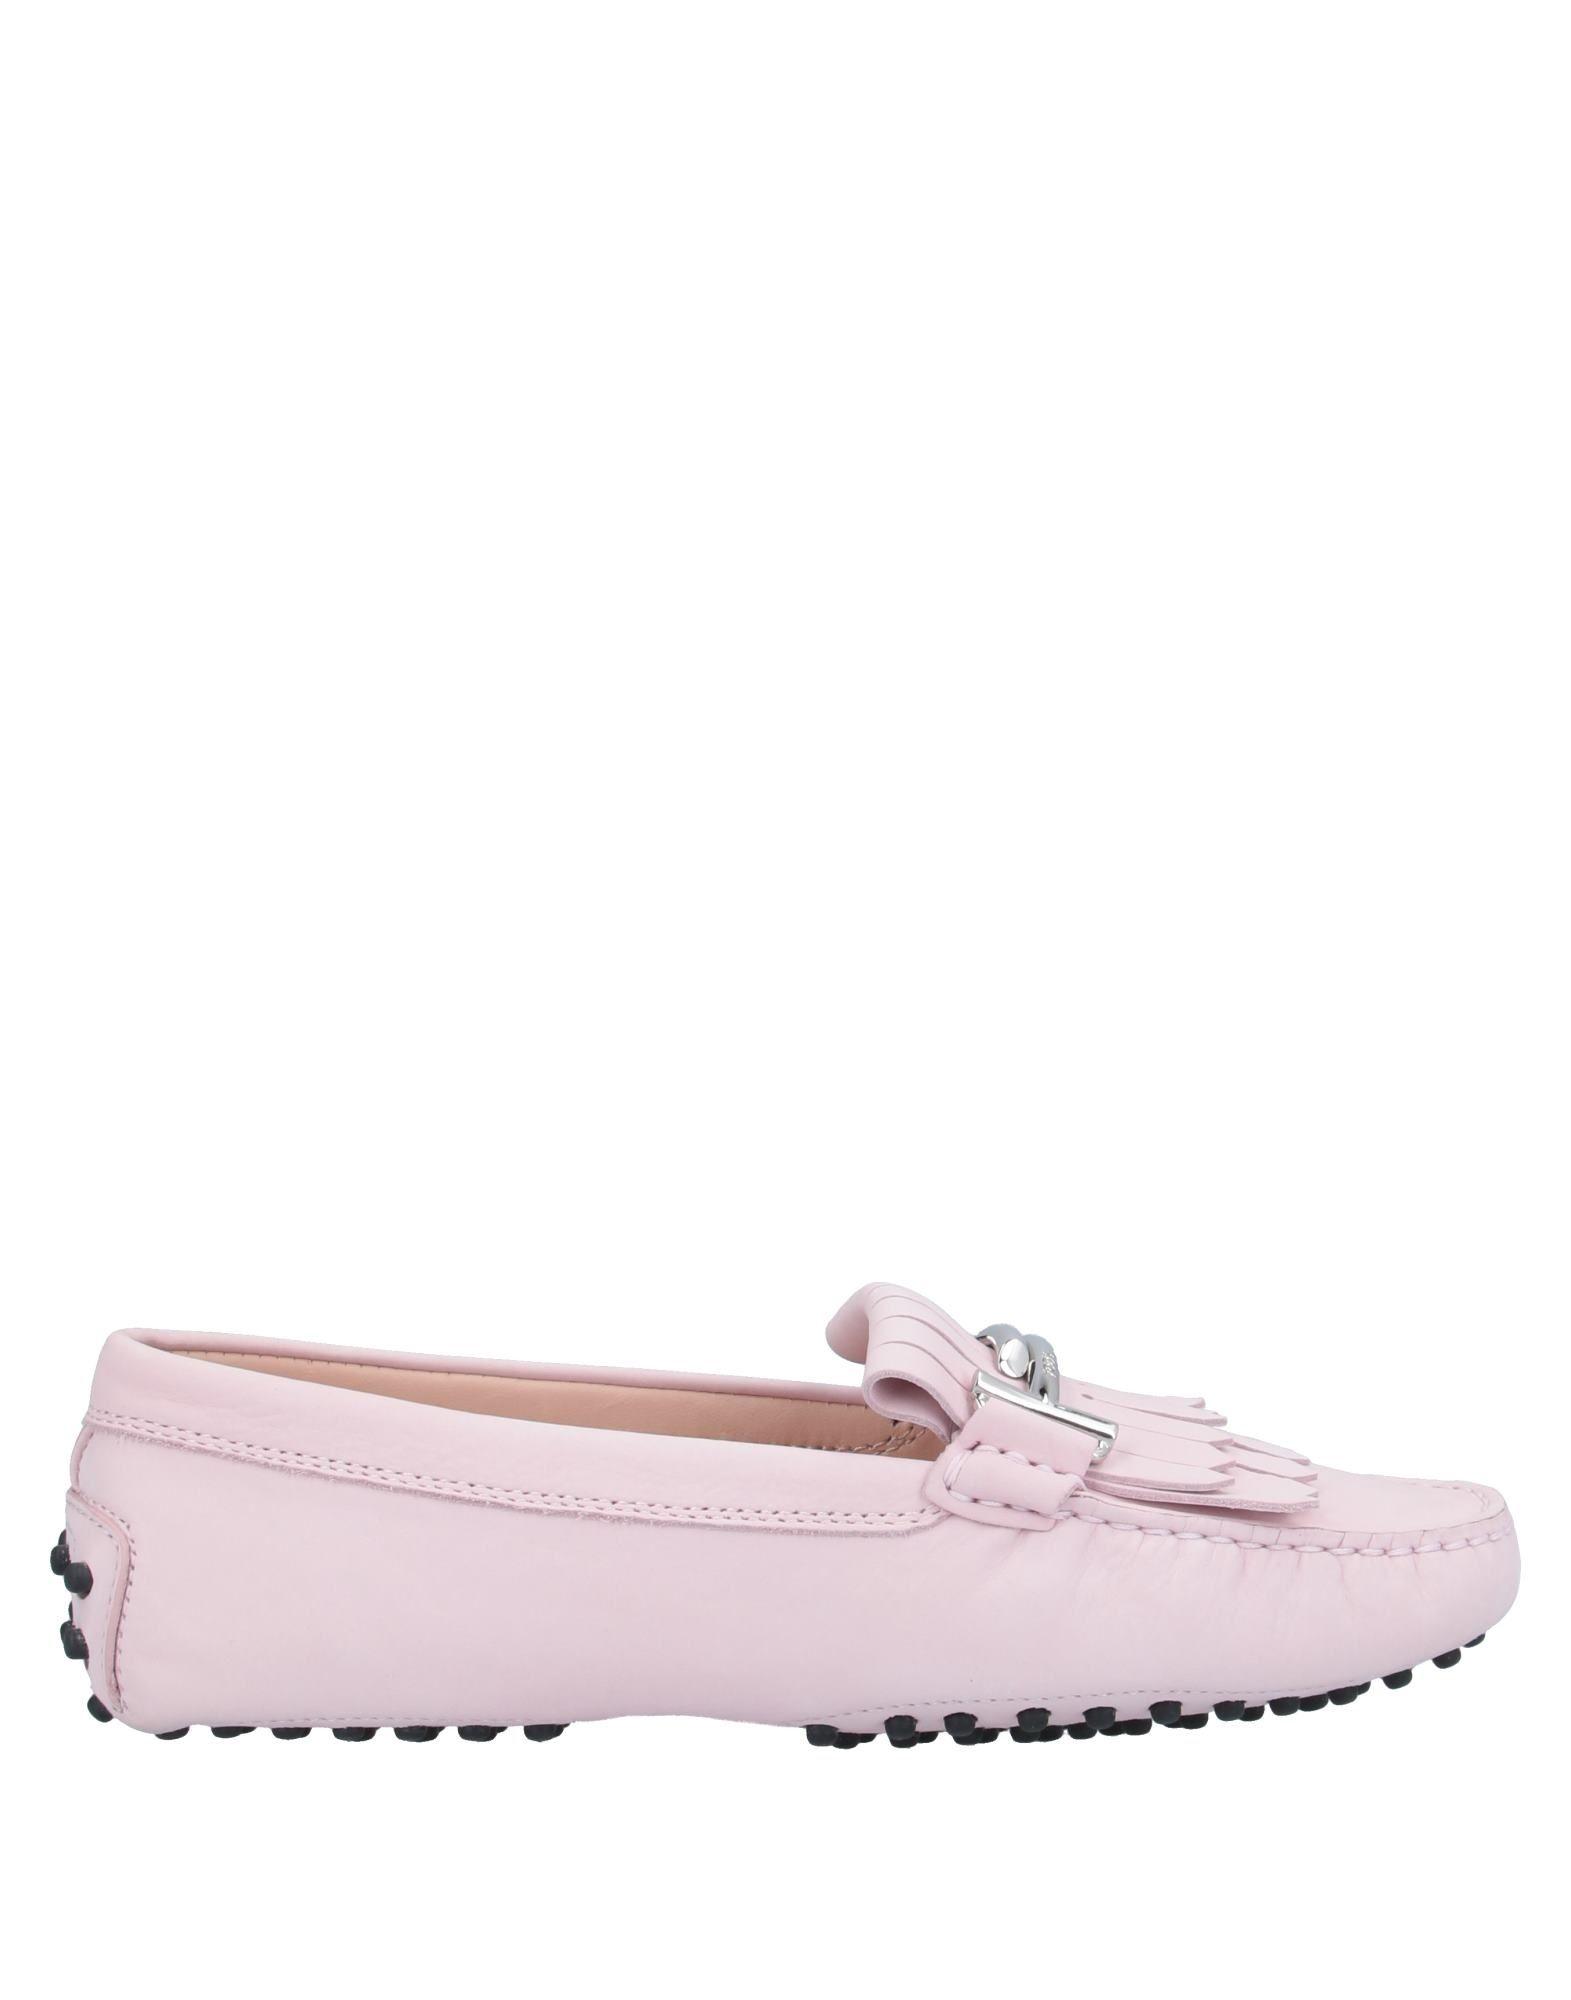 Tod's Leather Loafer in Light Pink (Pink) - Lyst